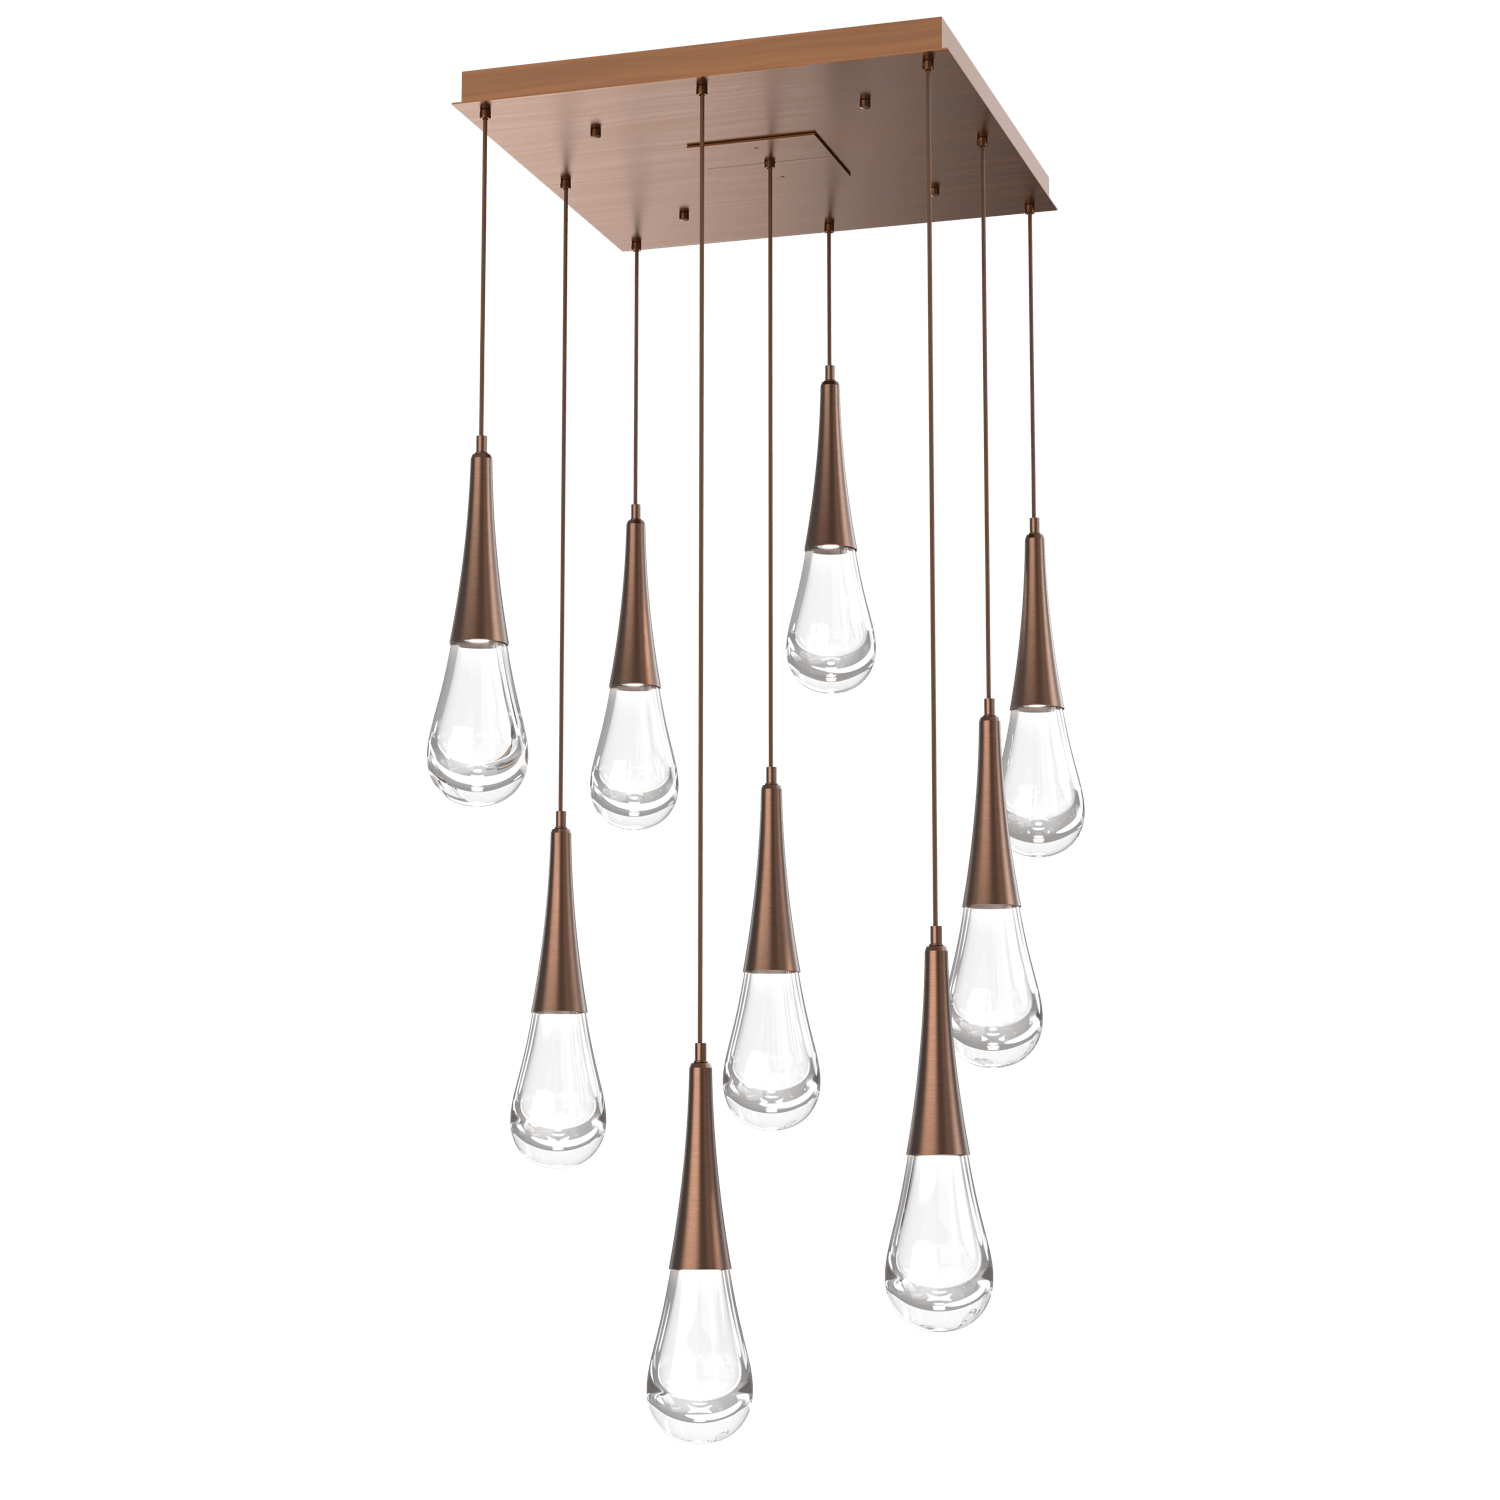 CHB0078-09-RB-Hammerton-Studio-Raindrop-9-light-square-pendant-chandelier-with-oil-rubbed-bronze-finish-and-clear-blown-glass-shades-and-LED-lamping